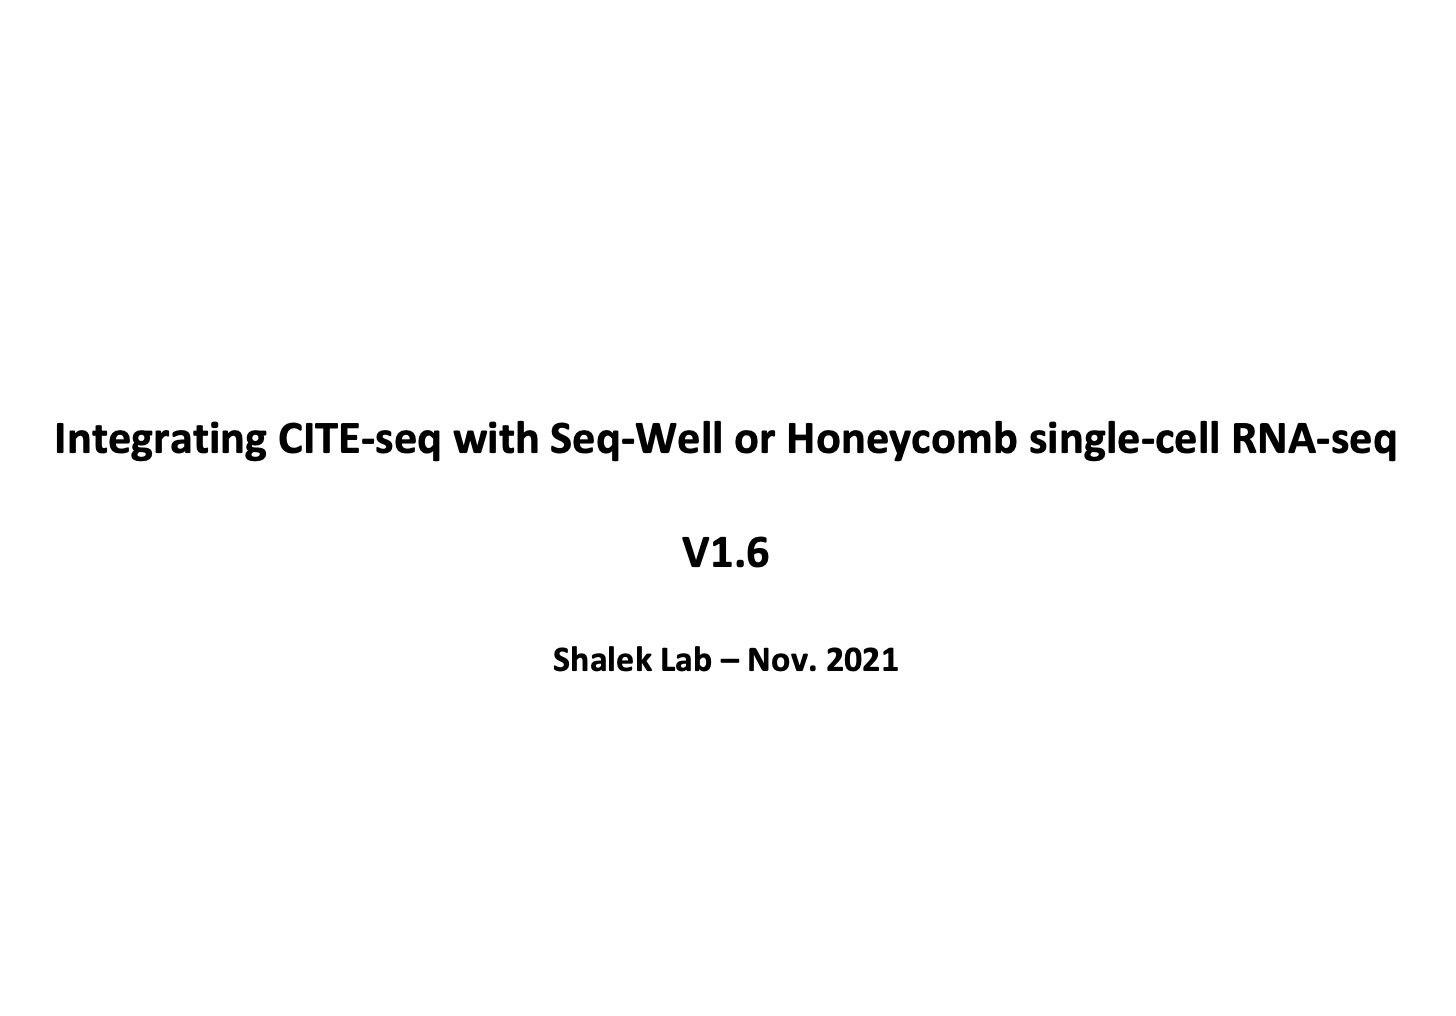 CITE-seq with Seq-Well & Honeycomb